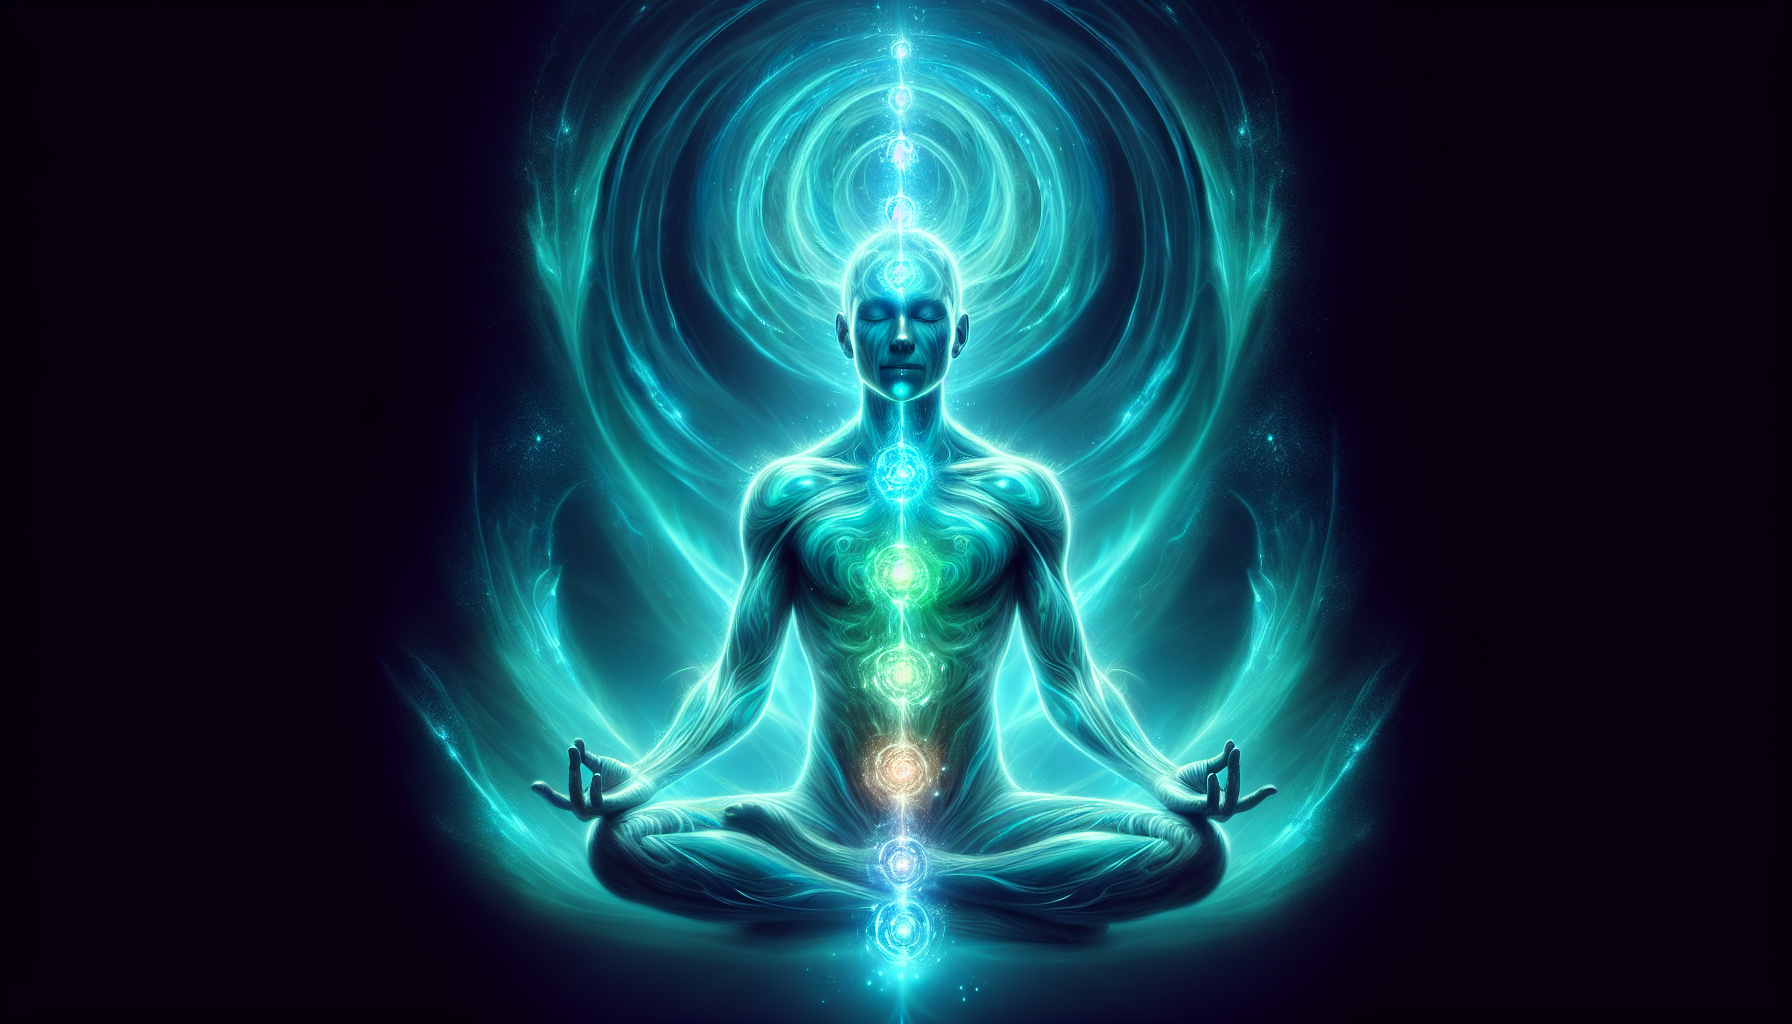 Illustration of a person meditating with vibrant energy flowing through the chakras